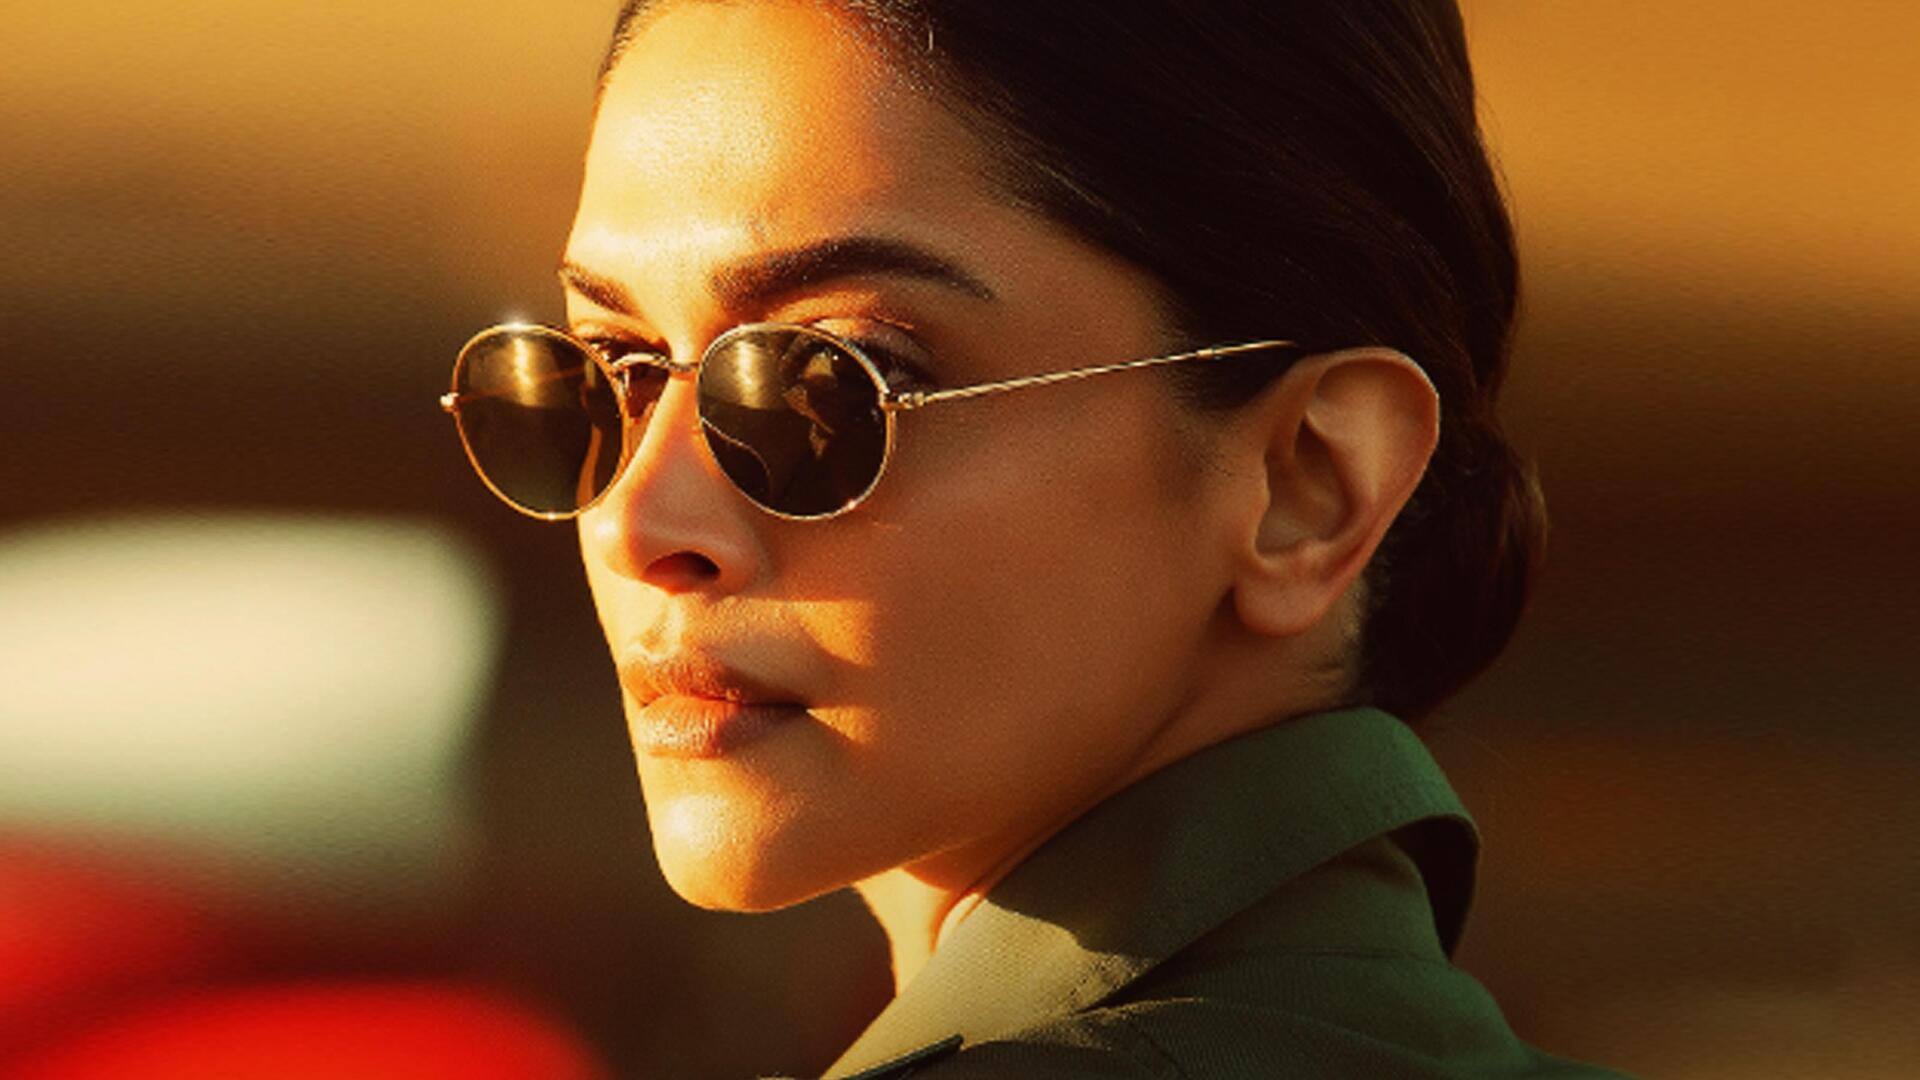 'Fighter' first look poster: Deepika Padukone is determined and focused